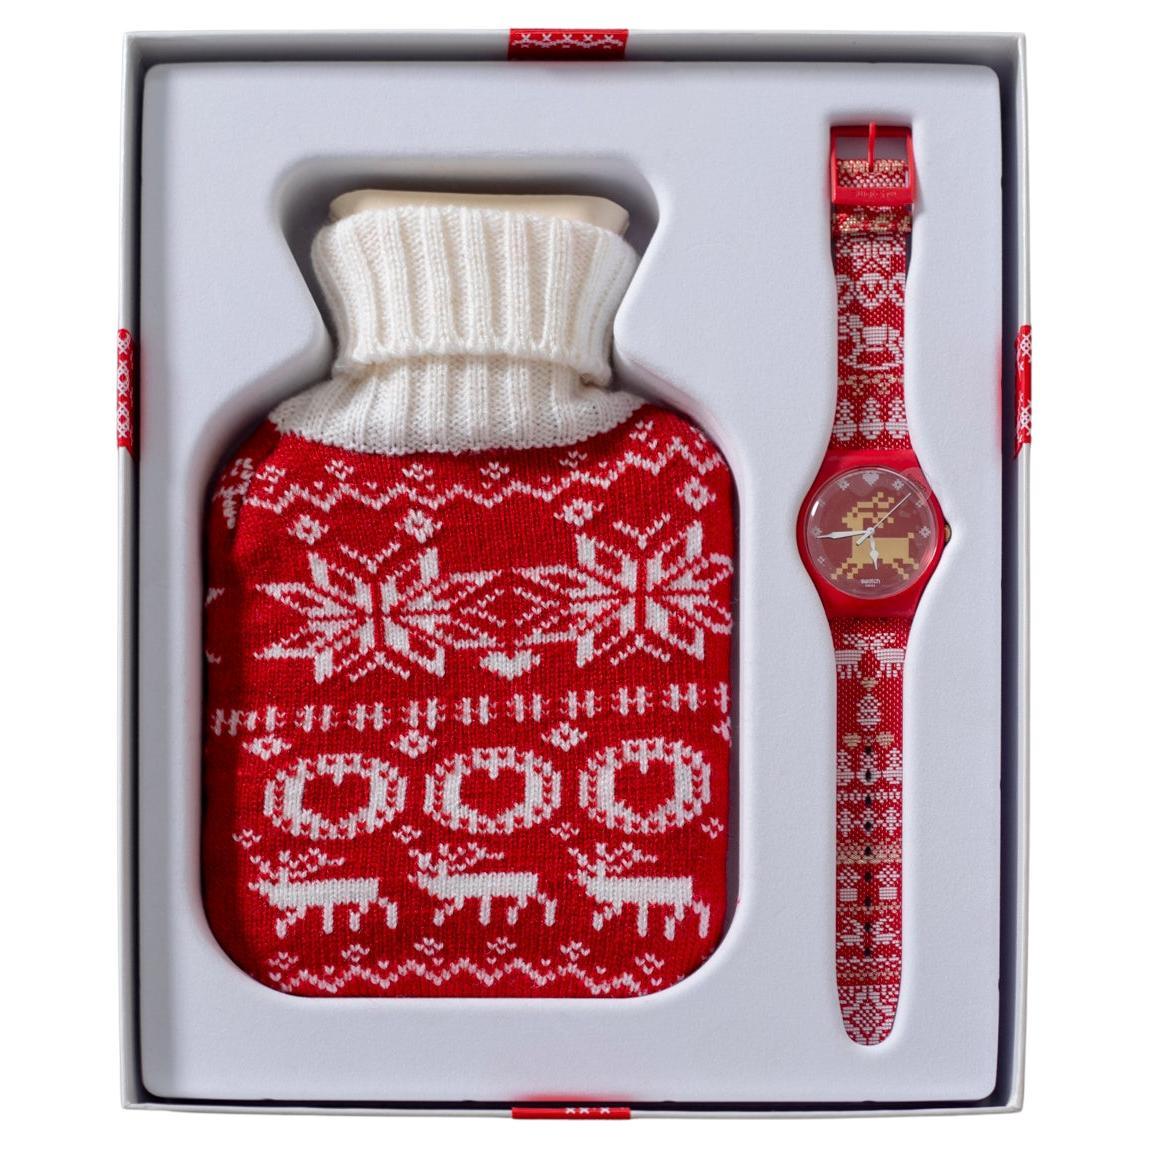 Swatch Red Knit Limited Edition For Christmas 2013 For Sale